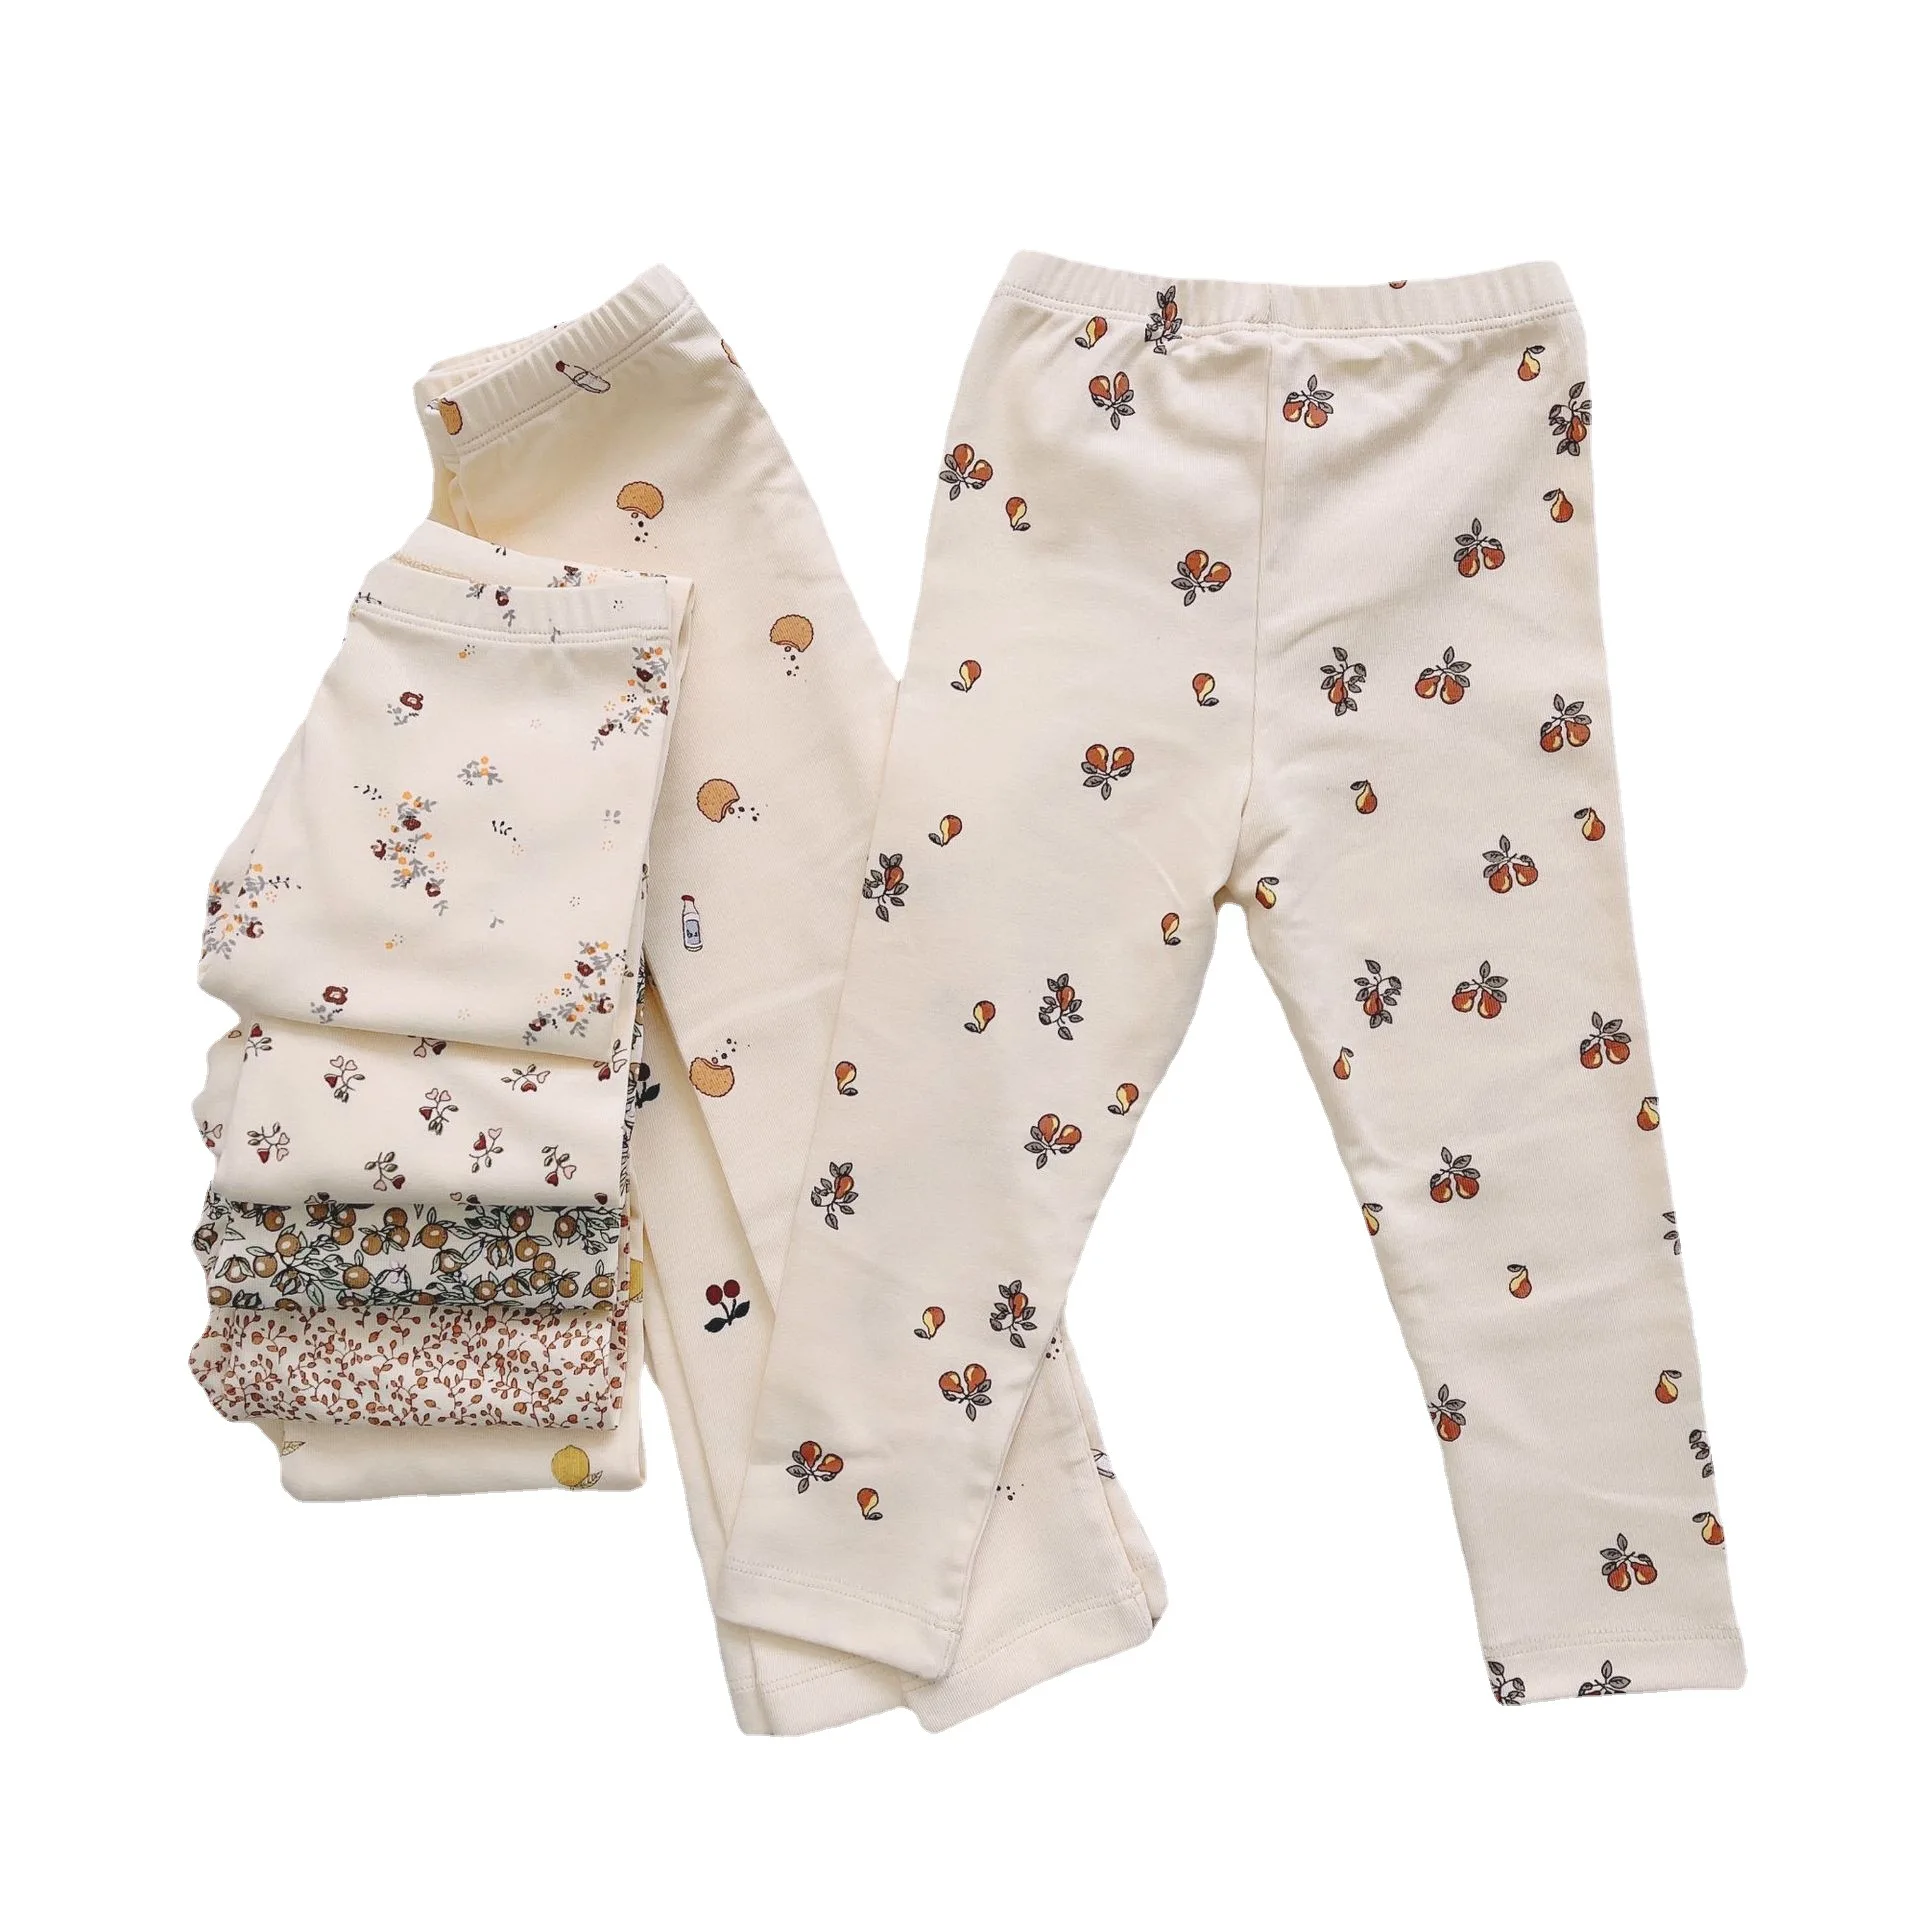 Children's home wear pajamas printed set baby air conditioning clothing cotton pajamas for boys and girls